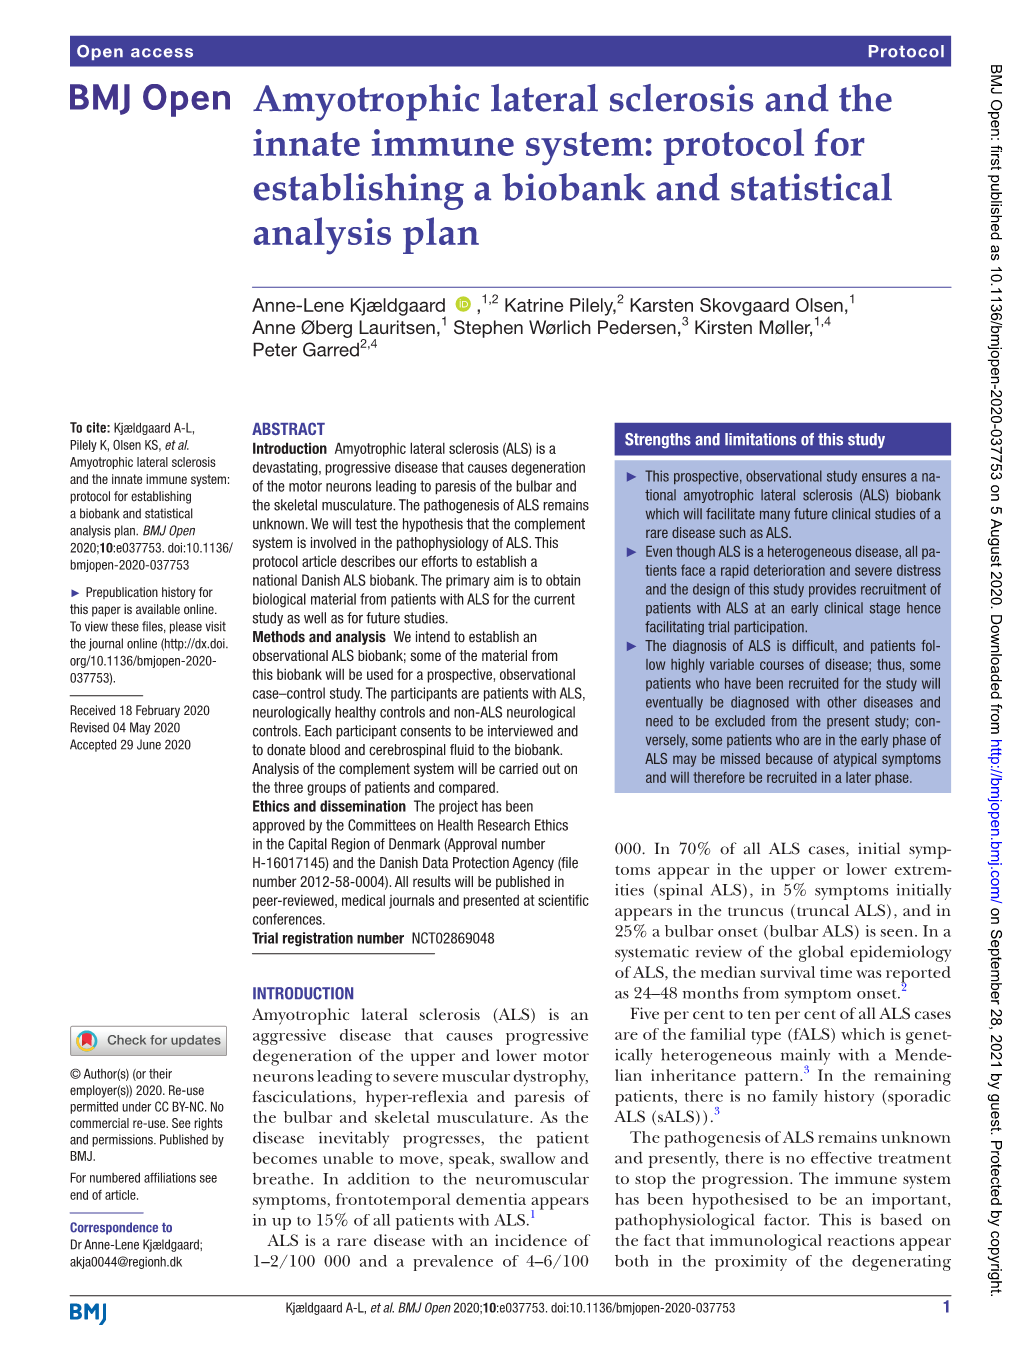 Amyotrophic Lateral Sclerosis and the Innate Immune System: Protocol for Establishing a Biobank and Statistical Analysis Plan